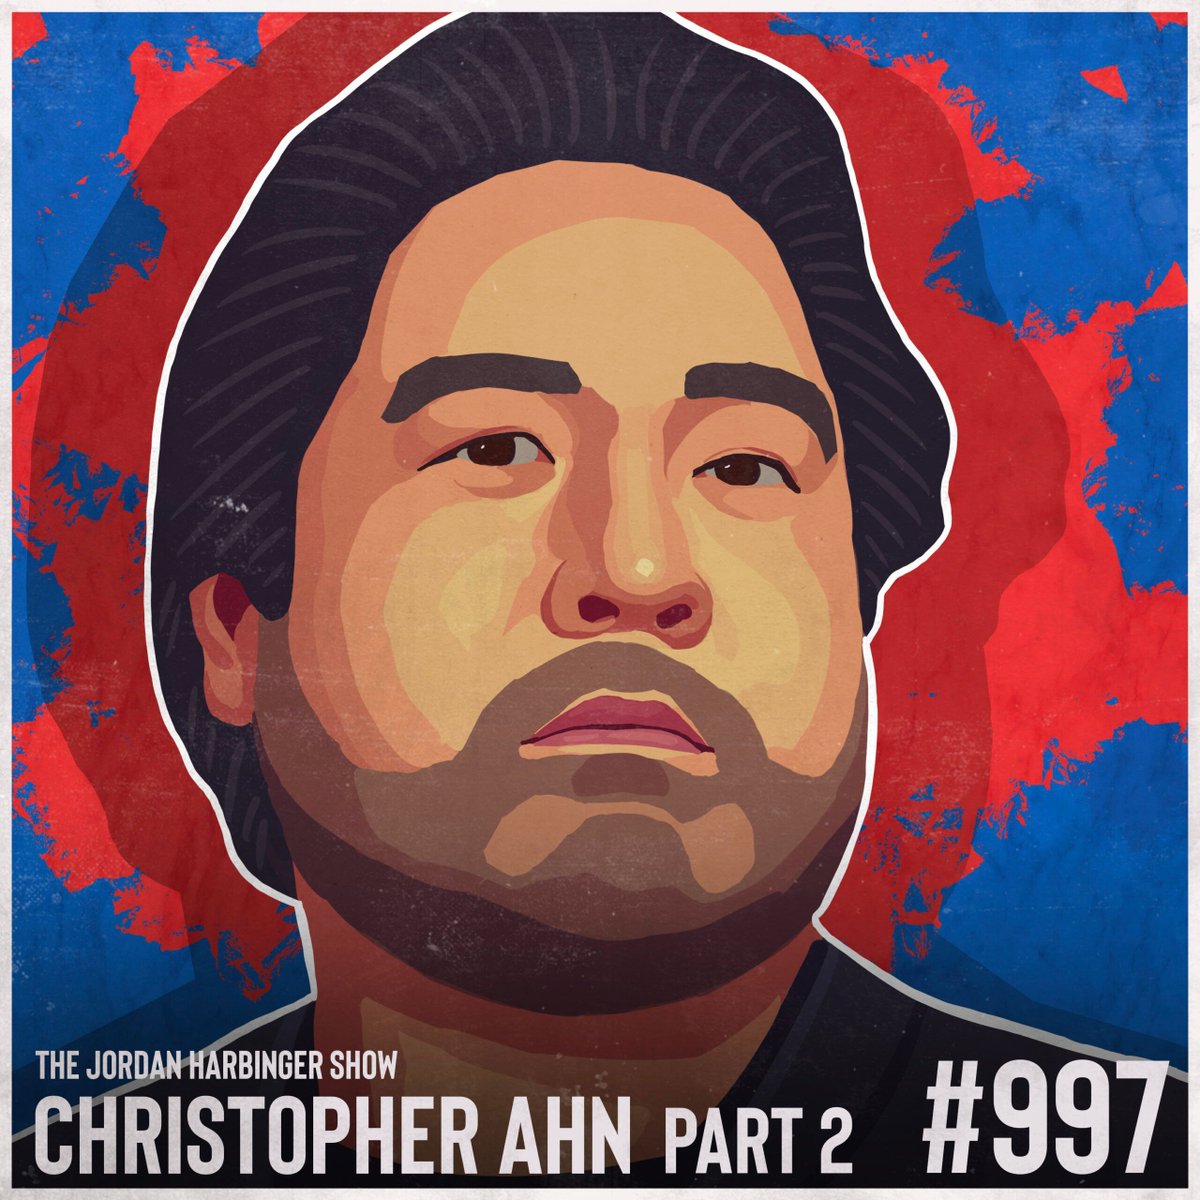 Christopher Ahn risked it all to save North Korean defectors. Now, he faces extradition and assassination. Listen to part 2/2 of his story here! Notes buff.ly/4bBAWrV Apple buff.ly/2RRoxcb Spotify buff.ly/3mrKq1v Overcast buff.ly/3mpWrlb